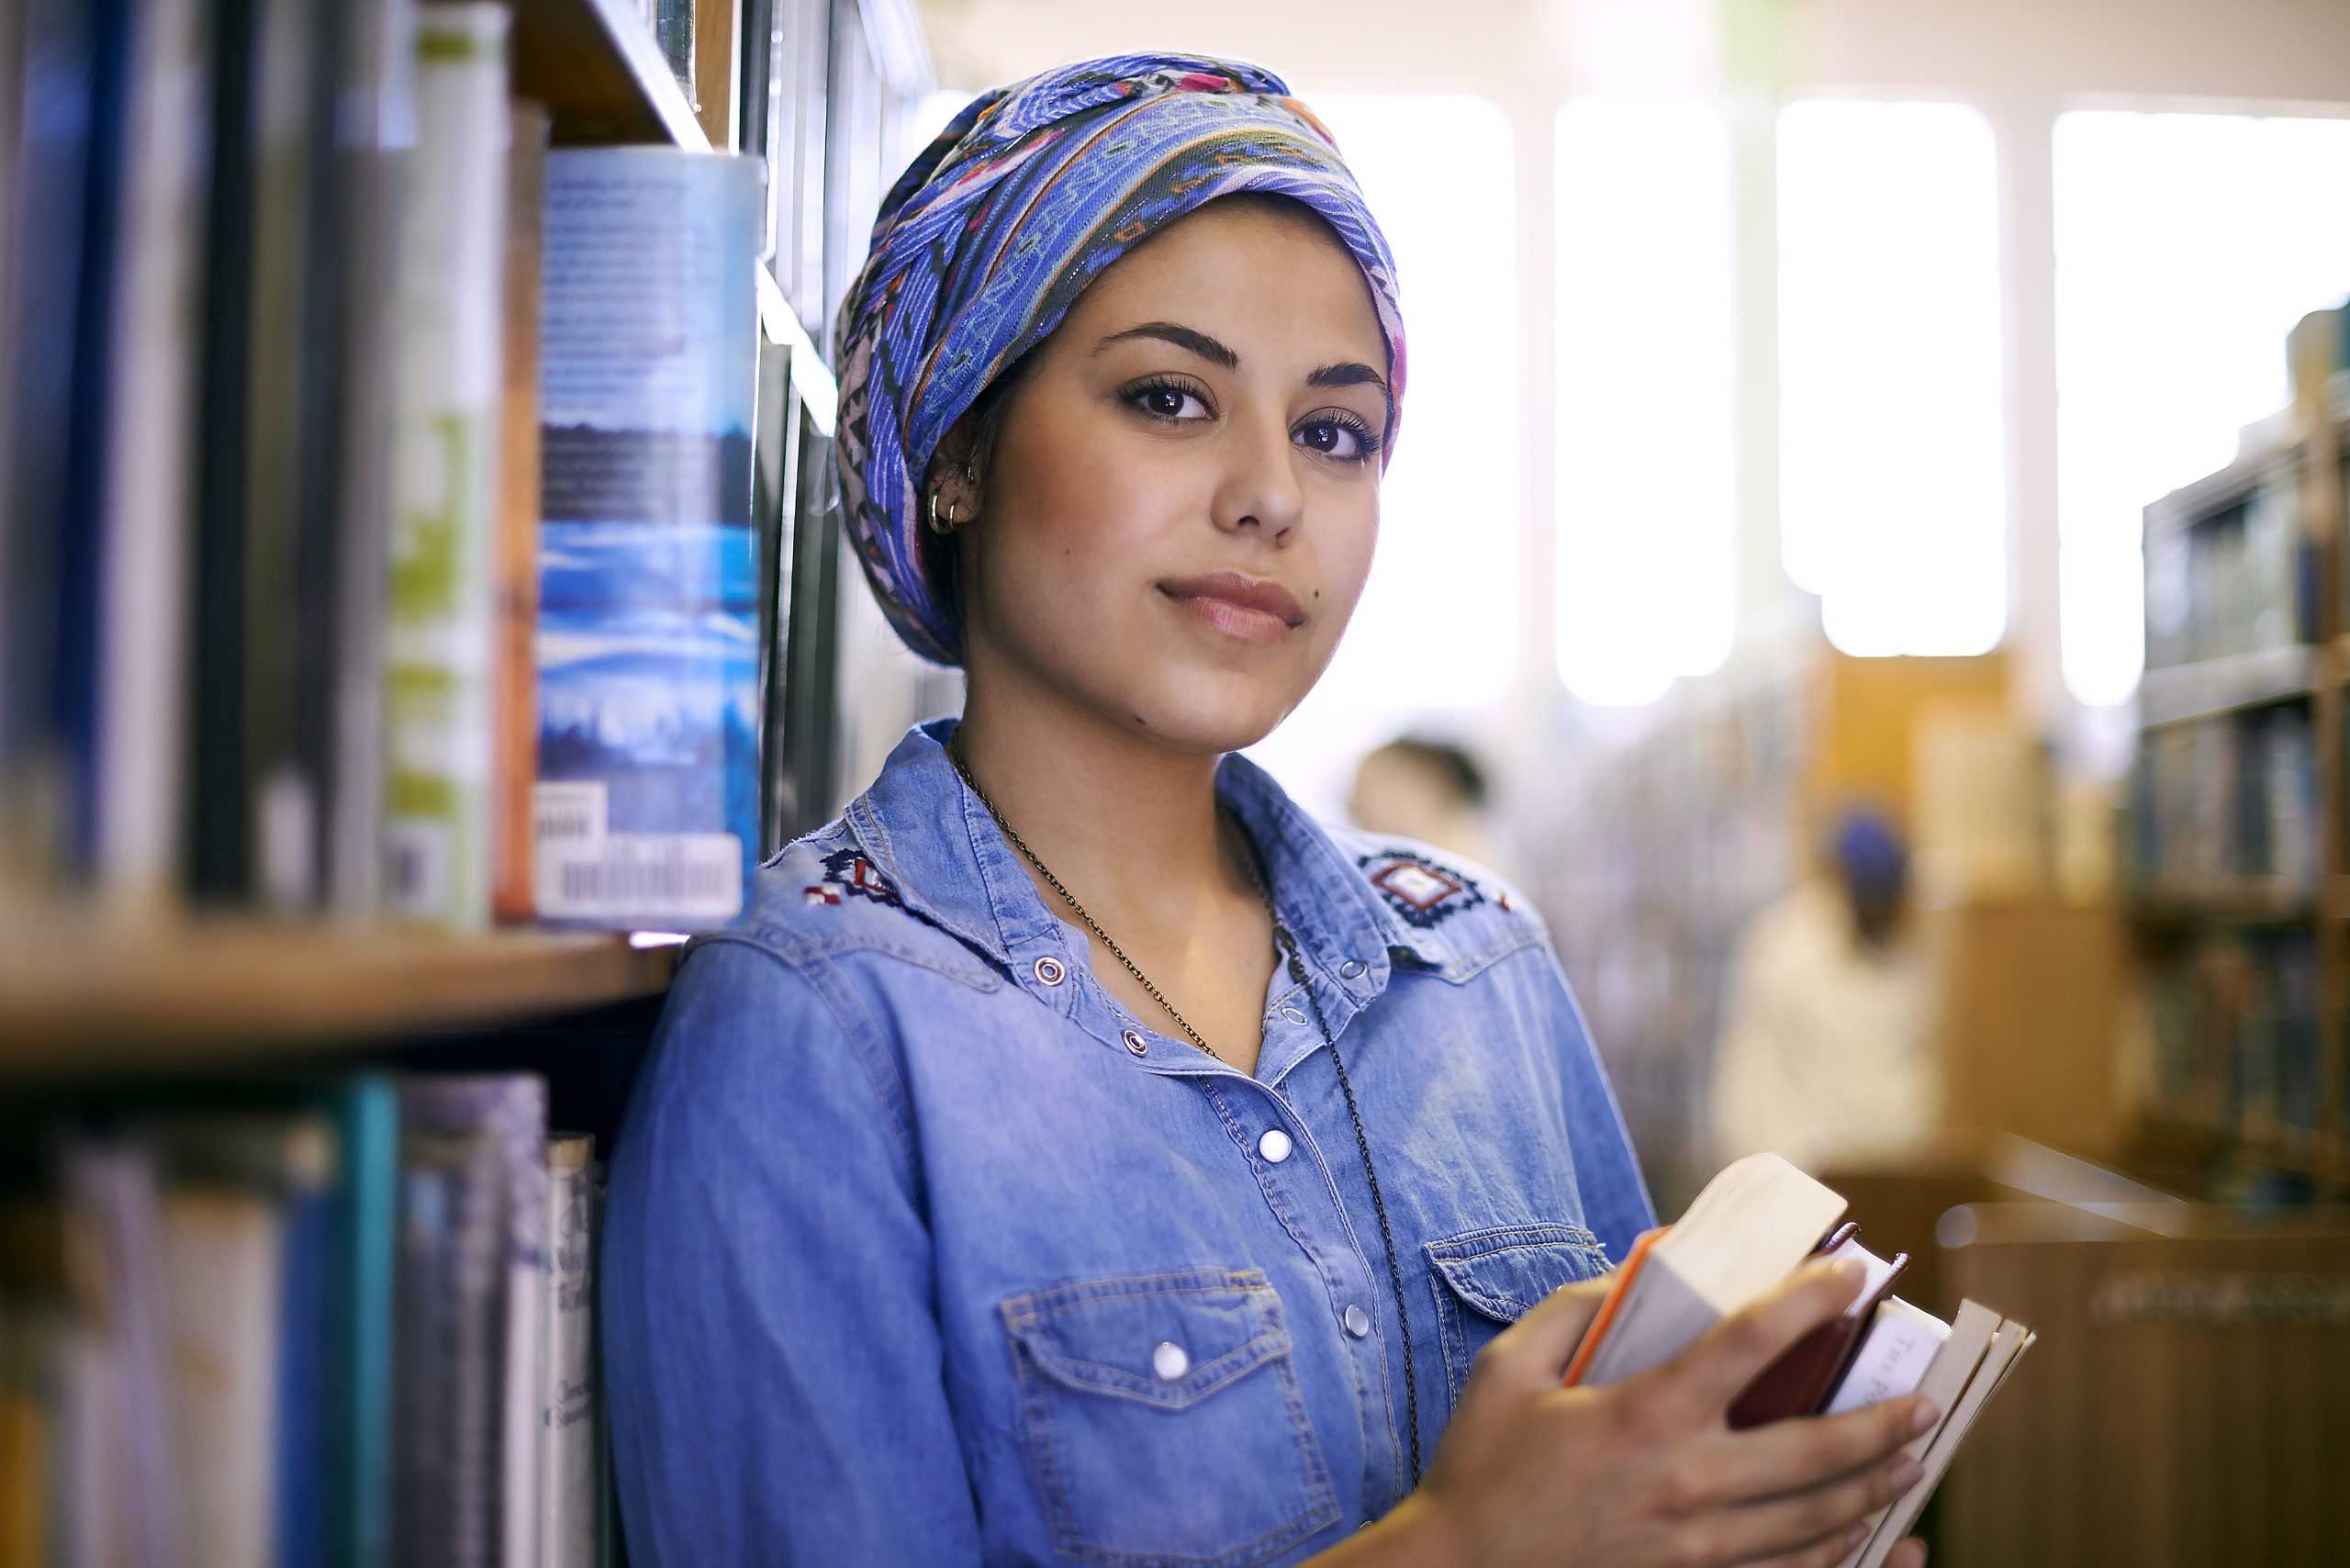 A woman with medium-light skin wearing a head scarf holding a stack of books in a library.